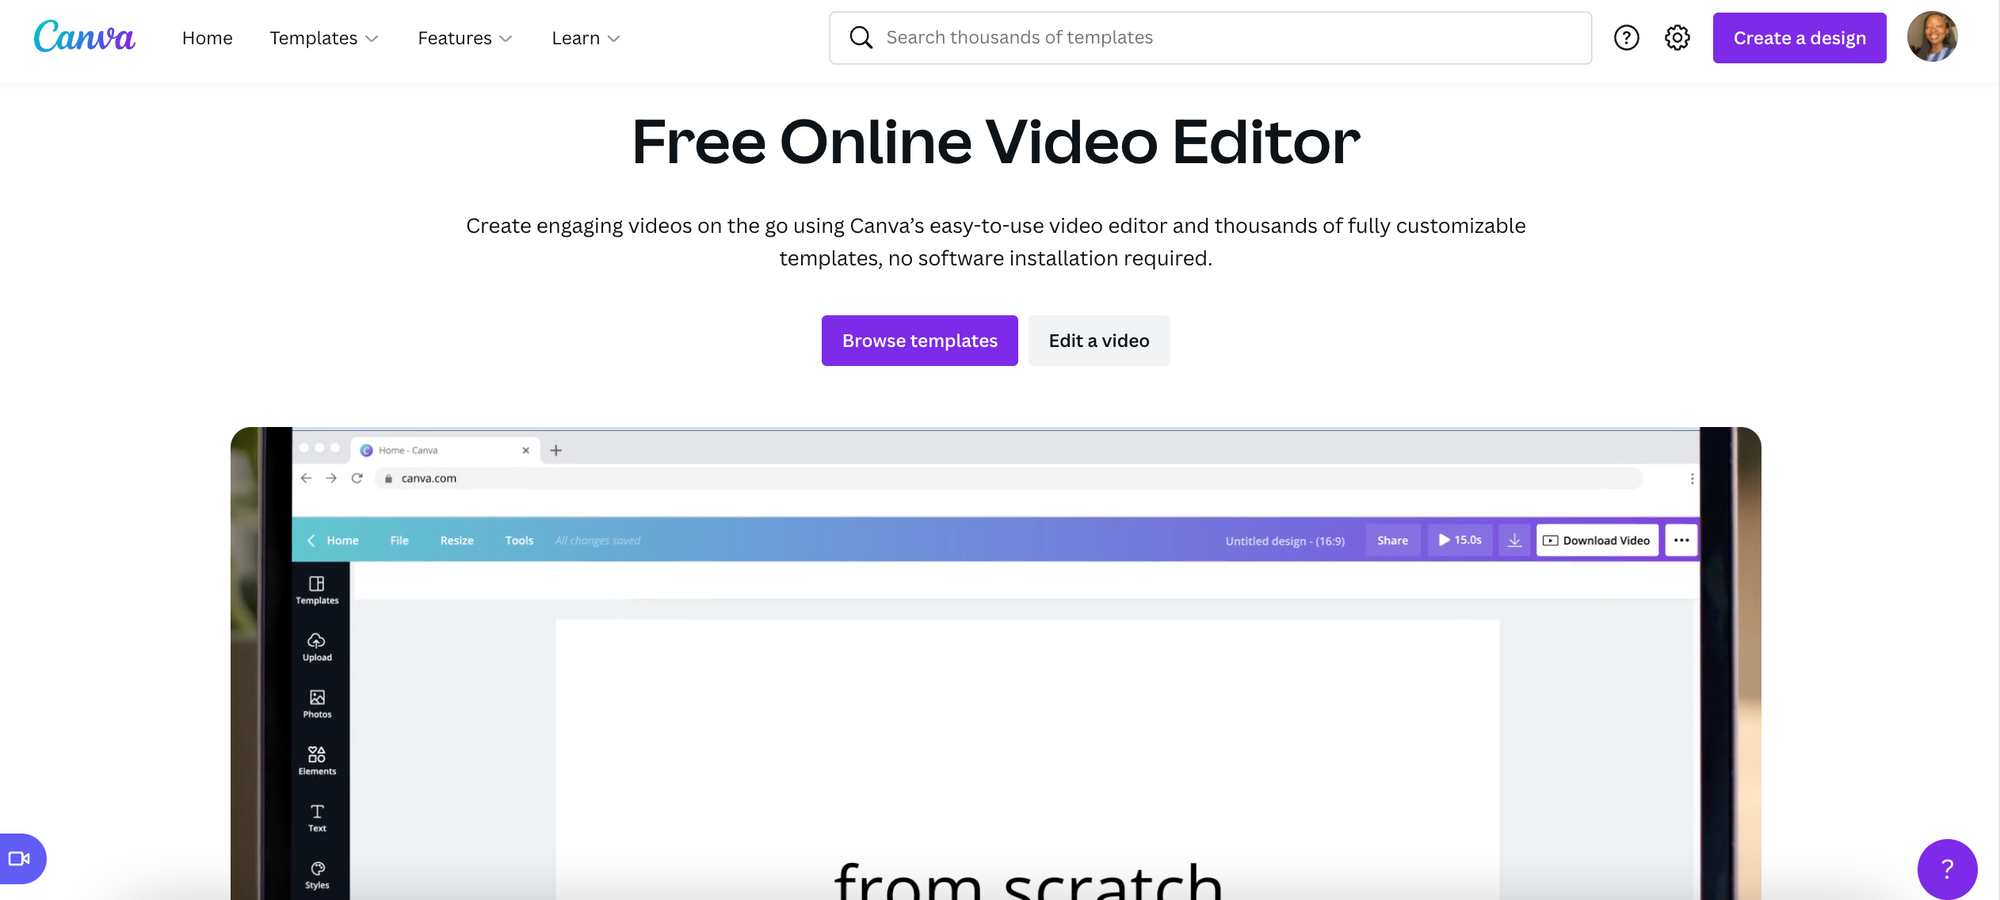 19 Best Free Video Editing Software for Marketers